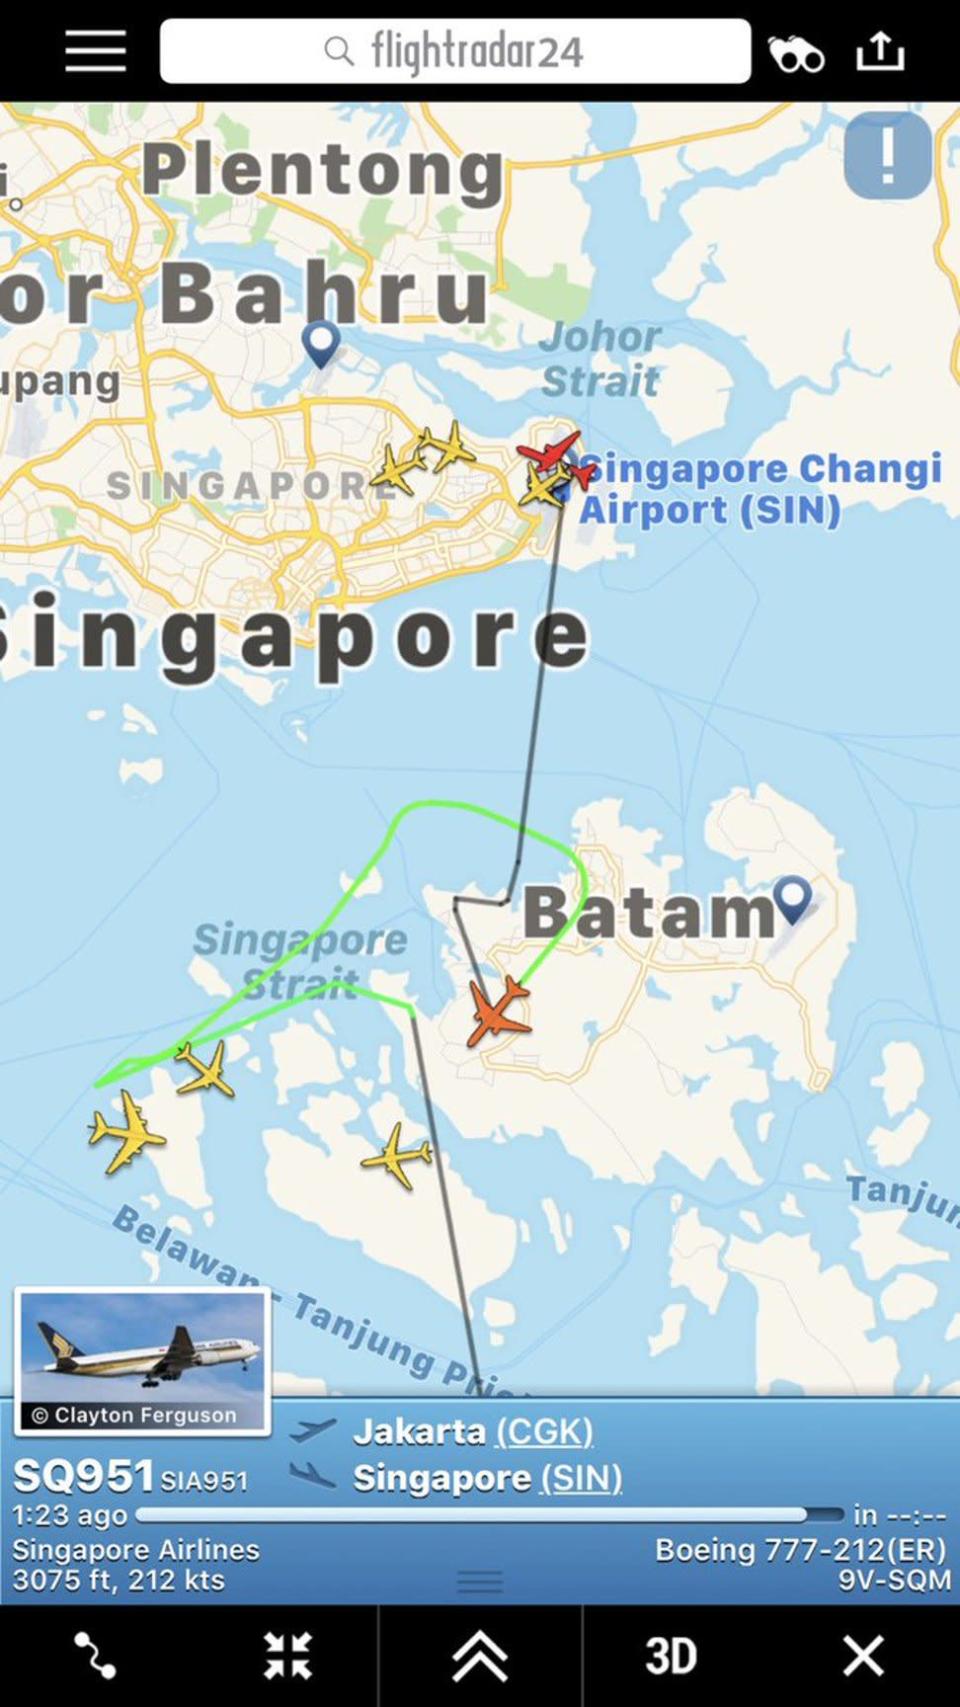 Singapore Airlines bomb hoax: flight from Mumbai escorted by fighter jets after pilot raised alarm